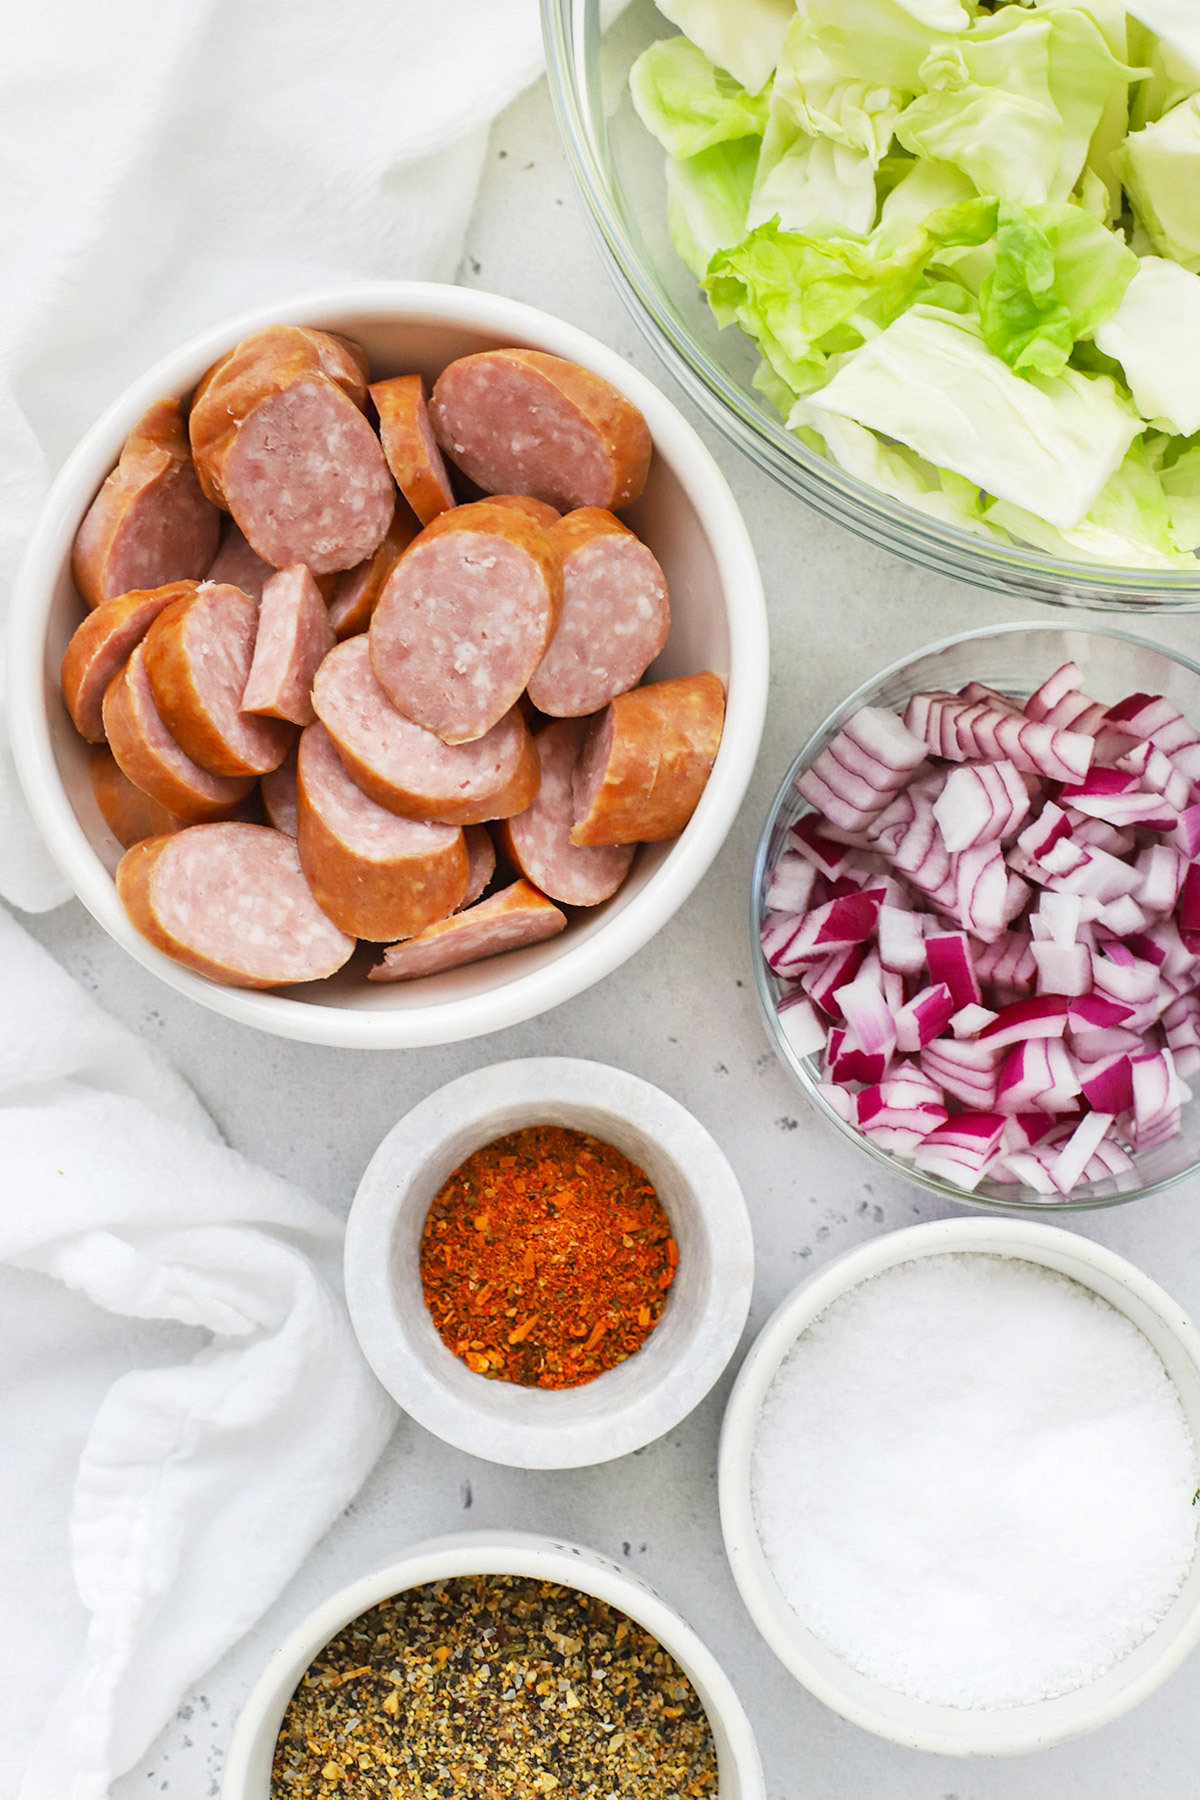 Overhead view of ingredients for a sausage & cabbage skillet dinner